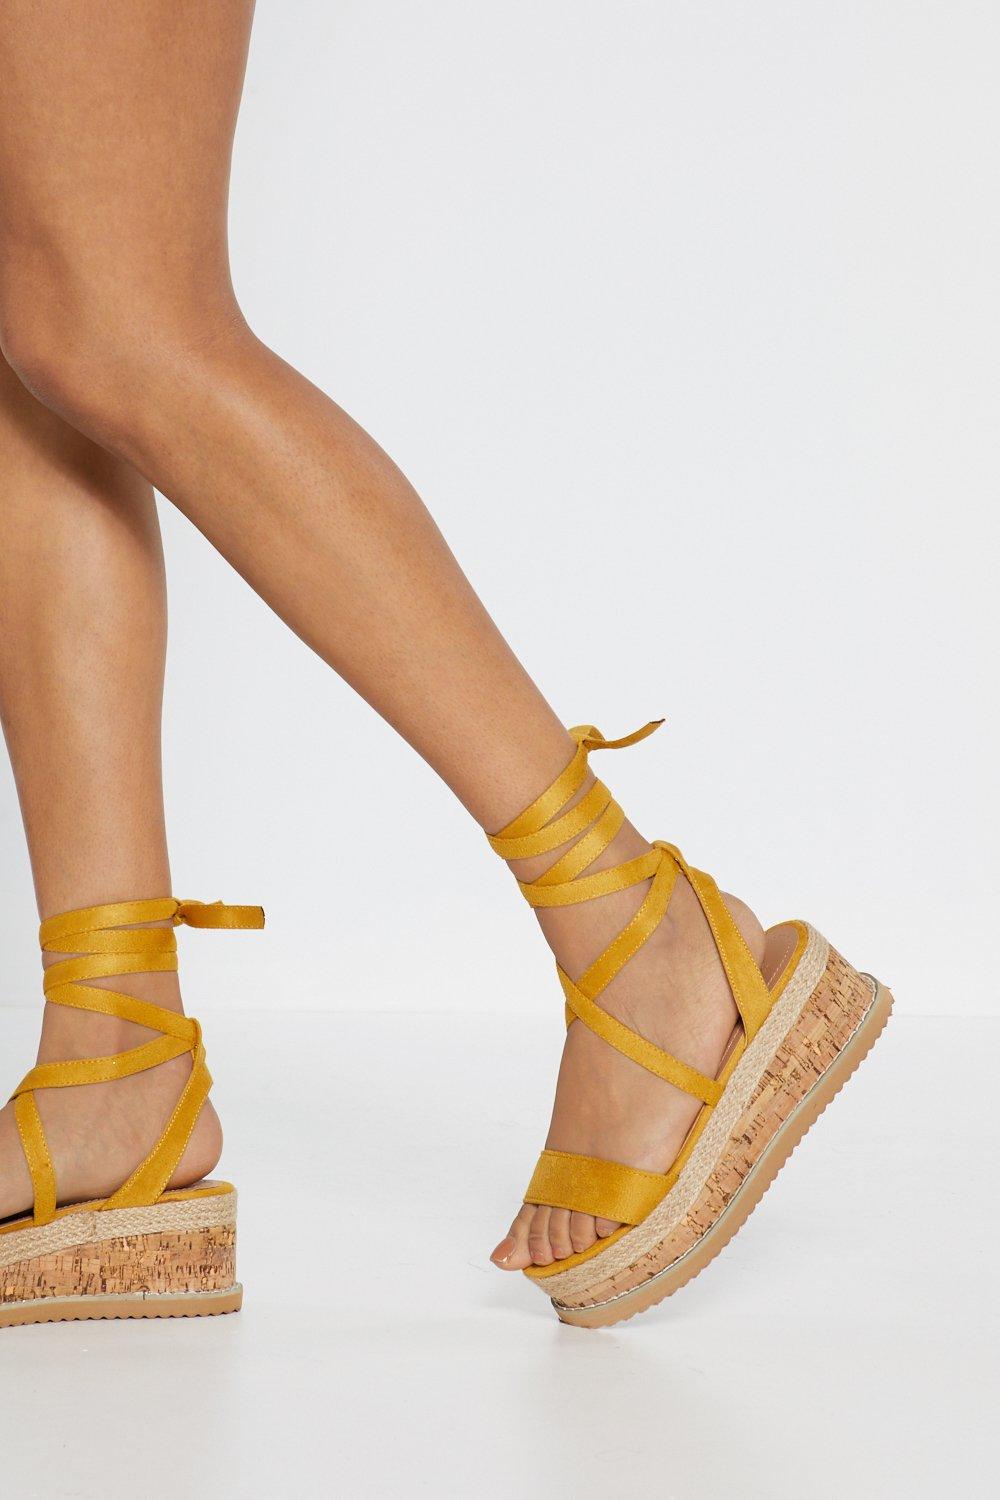 gold rope wedges